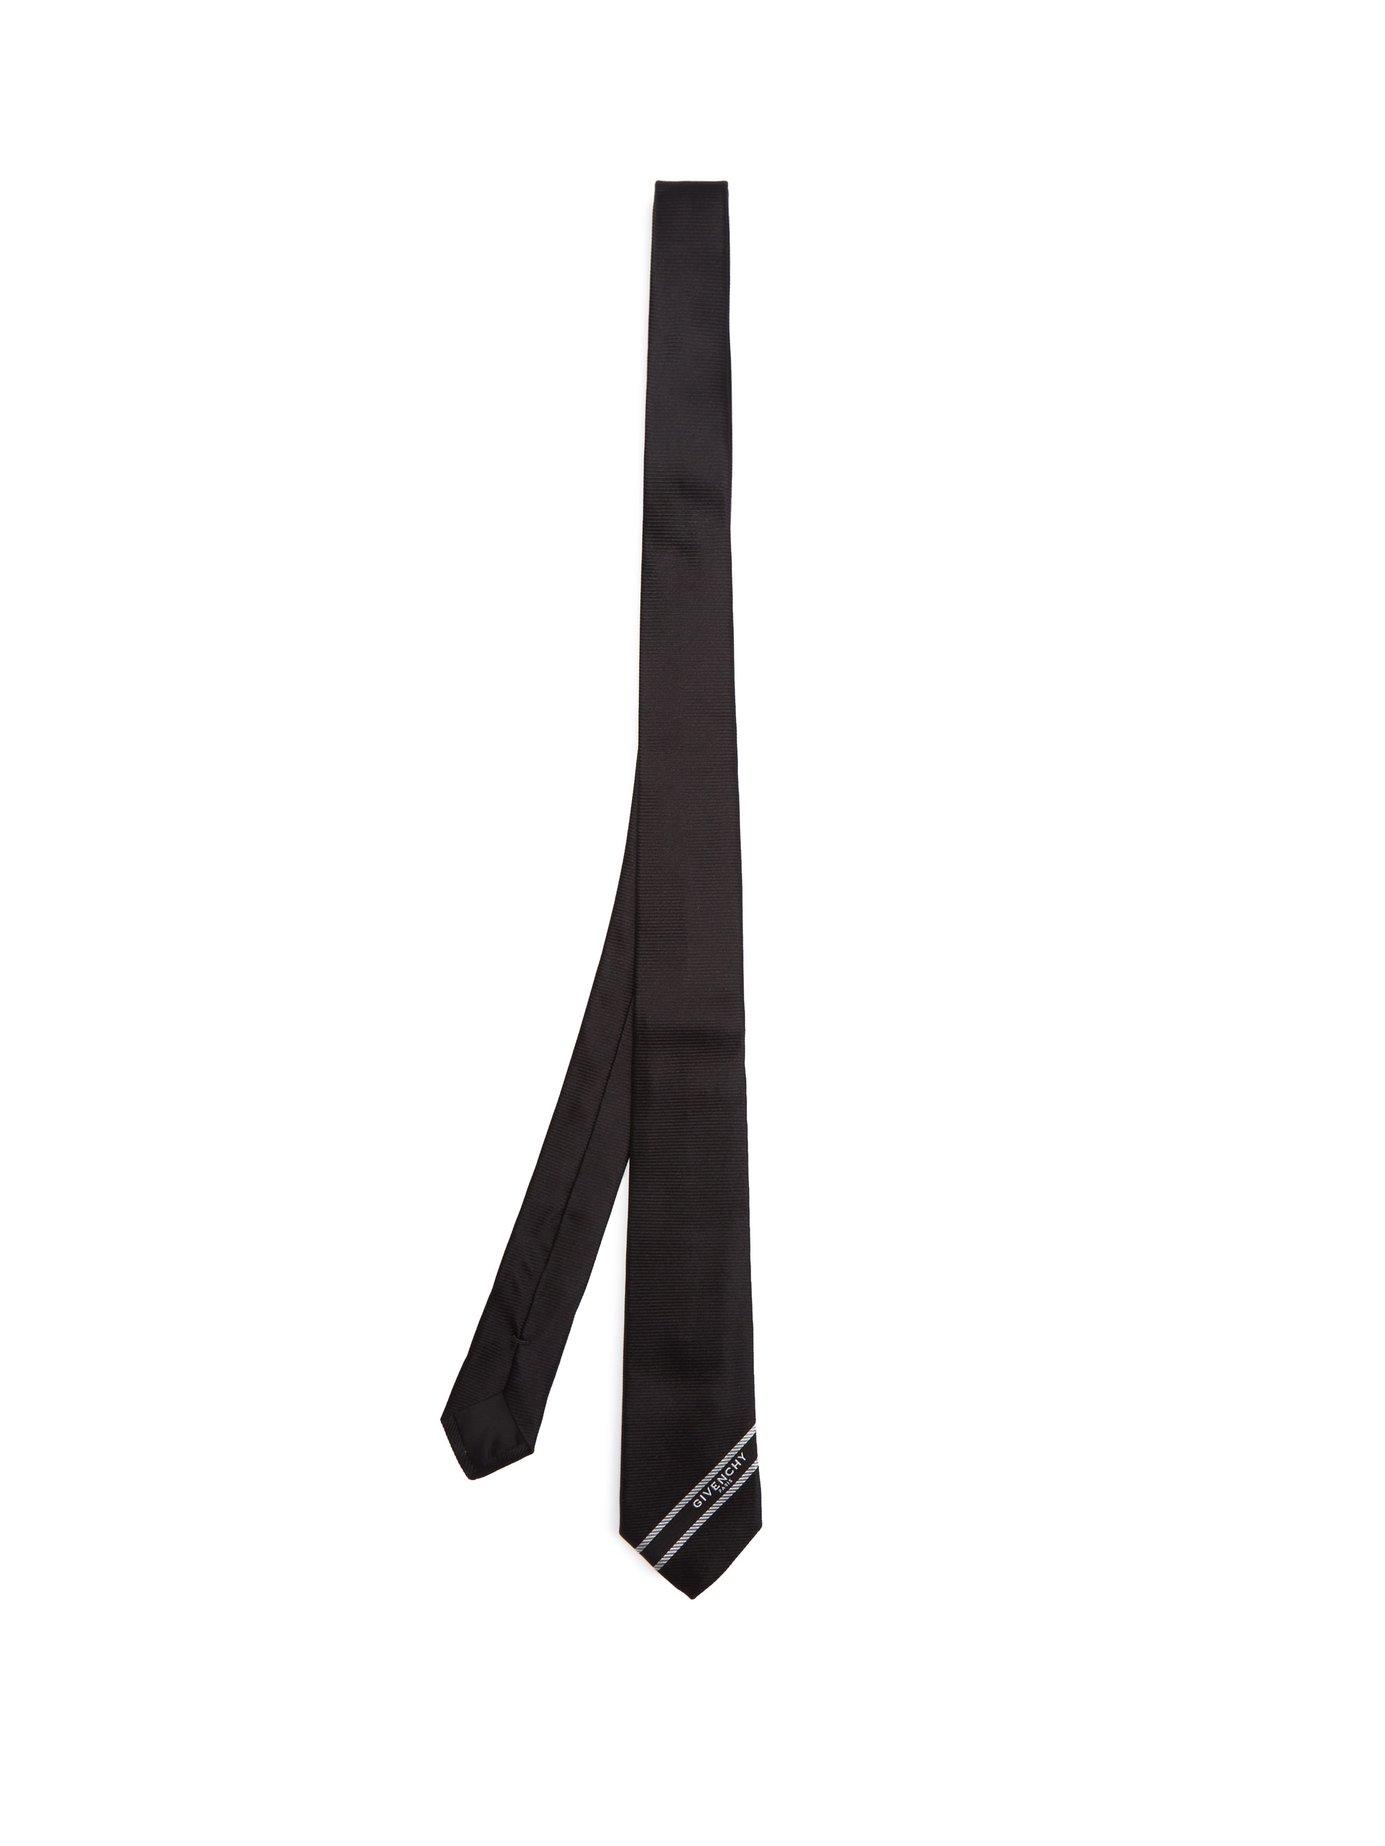 Givenchy Logo Striped Silk Tie in Black for Men - Lyst